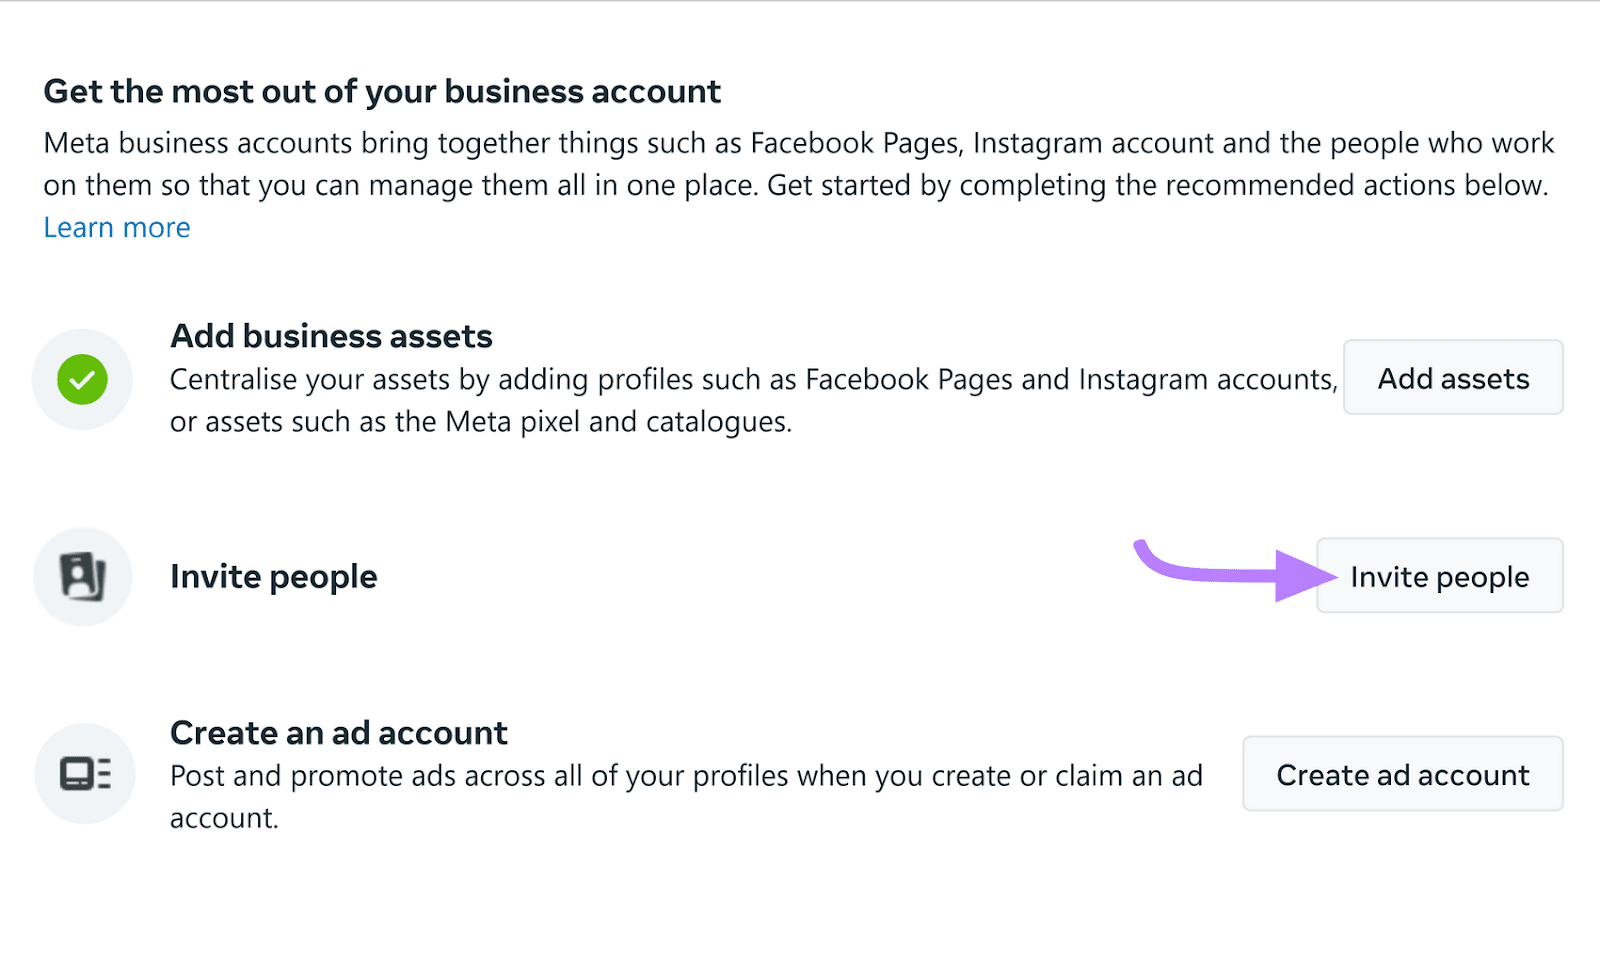 “Invite people" button selected under Facebook Business Manager settings step